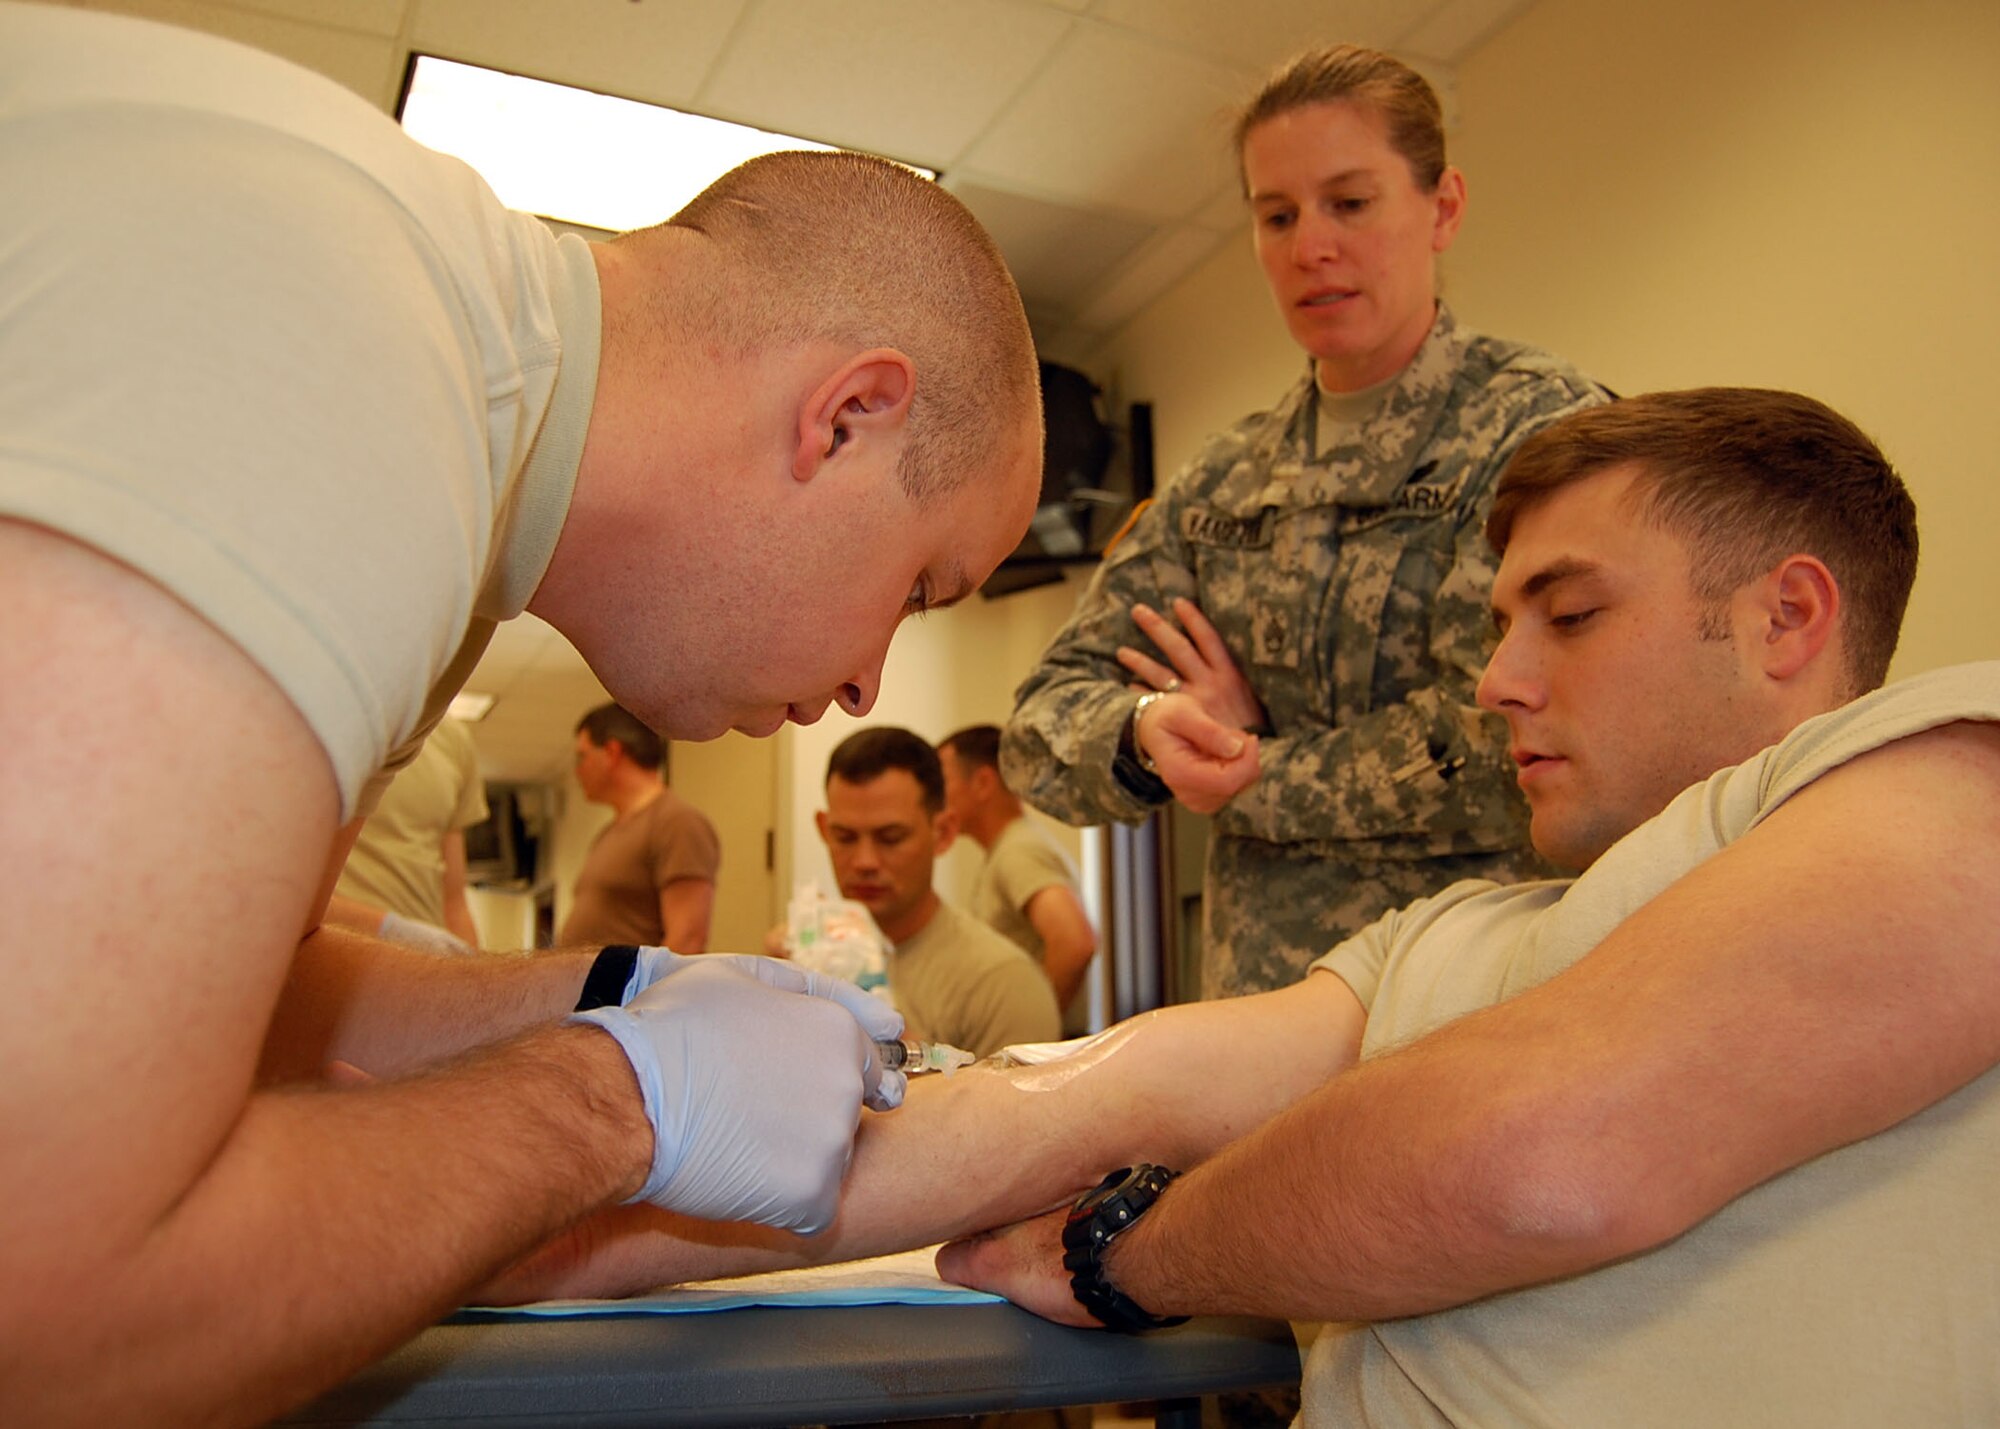 FORT BRAGG, N.C. -- Air Force 1st Lt. Marc Quesnel administers a saline lock, more commonly known as an IV, to Air Force 1st Lt. Adam Lazar during Combat Lifesaver training Dec. 16 while under the expert supervision of an Army combat medic. Lieutenant Quesnel, Team Paktia’s civil engineer, is deployed from Seymour Johnson Air Force Base, N.C. Lieutenant Lazar is deployed from Barksdale AFB, La., and serving as Team Zabul’s civil engineer. Current combat zone medical protocol calls for administering a saline lock to combat casualties because it’s easier to accomplish while veins are still viable rather than later when time might be short and the veins collapsed from blood loss. (U.S. Air Force photo/Capt. Ken Hall)